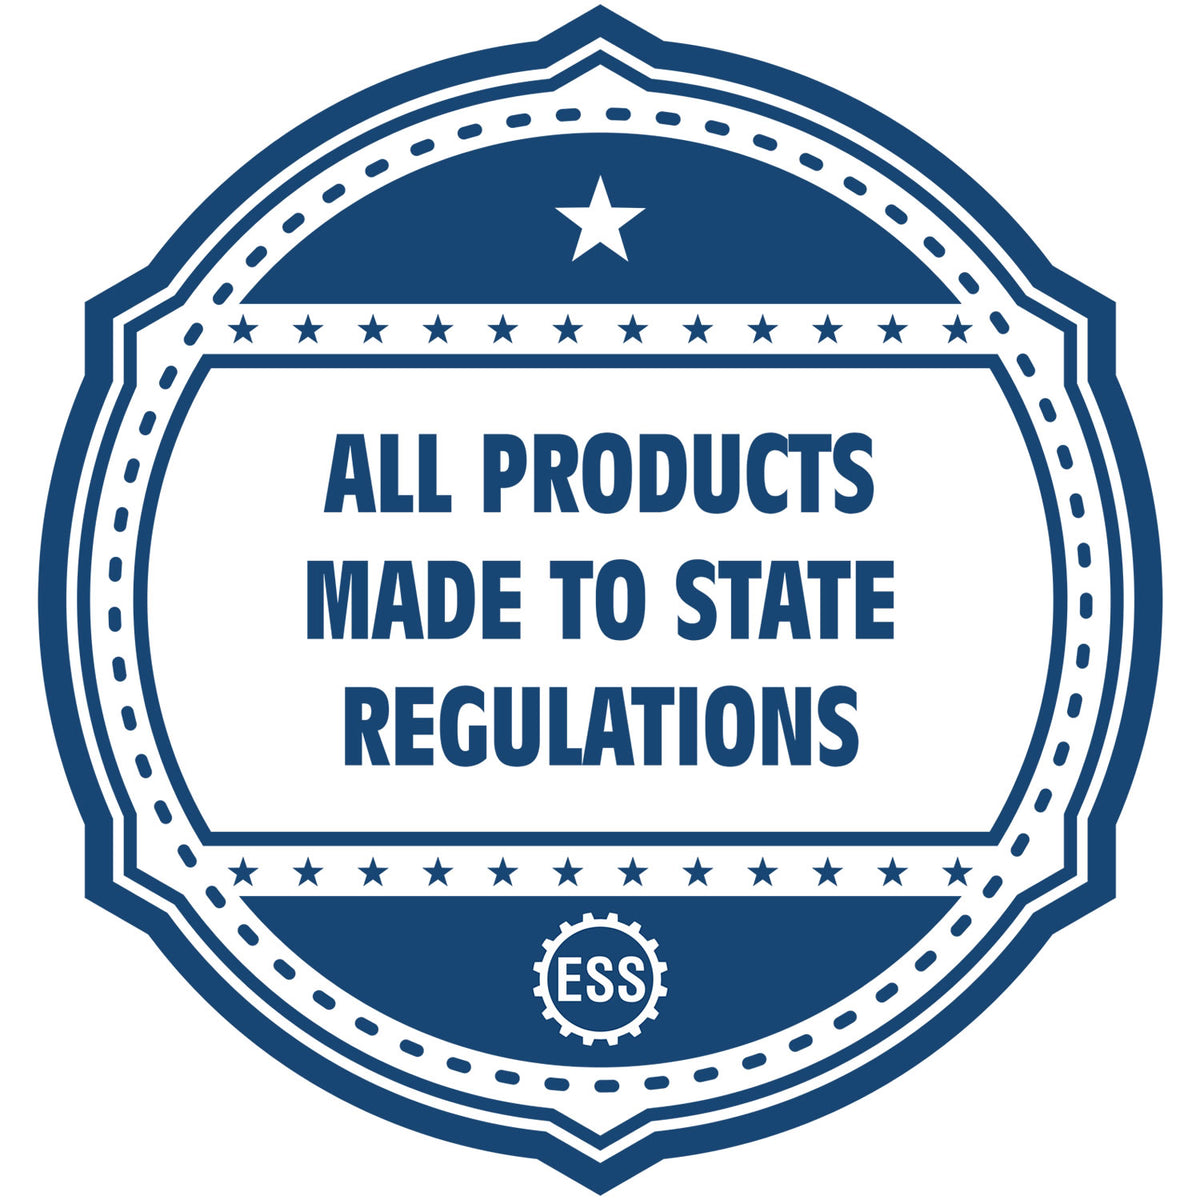 An icon or badge element for the Soft Pocket Delaware Landscape Architect Embosser showing that this product is made in compliance with state regulations.